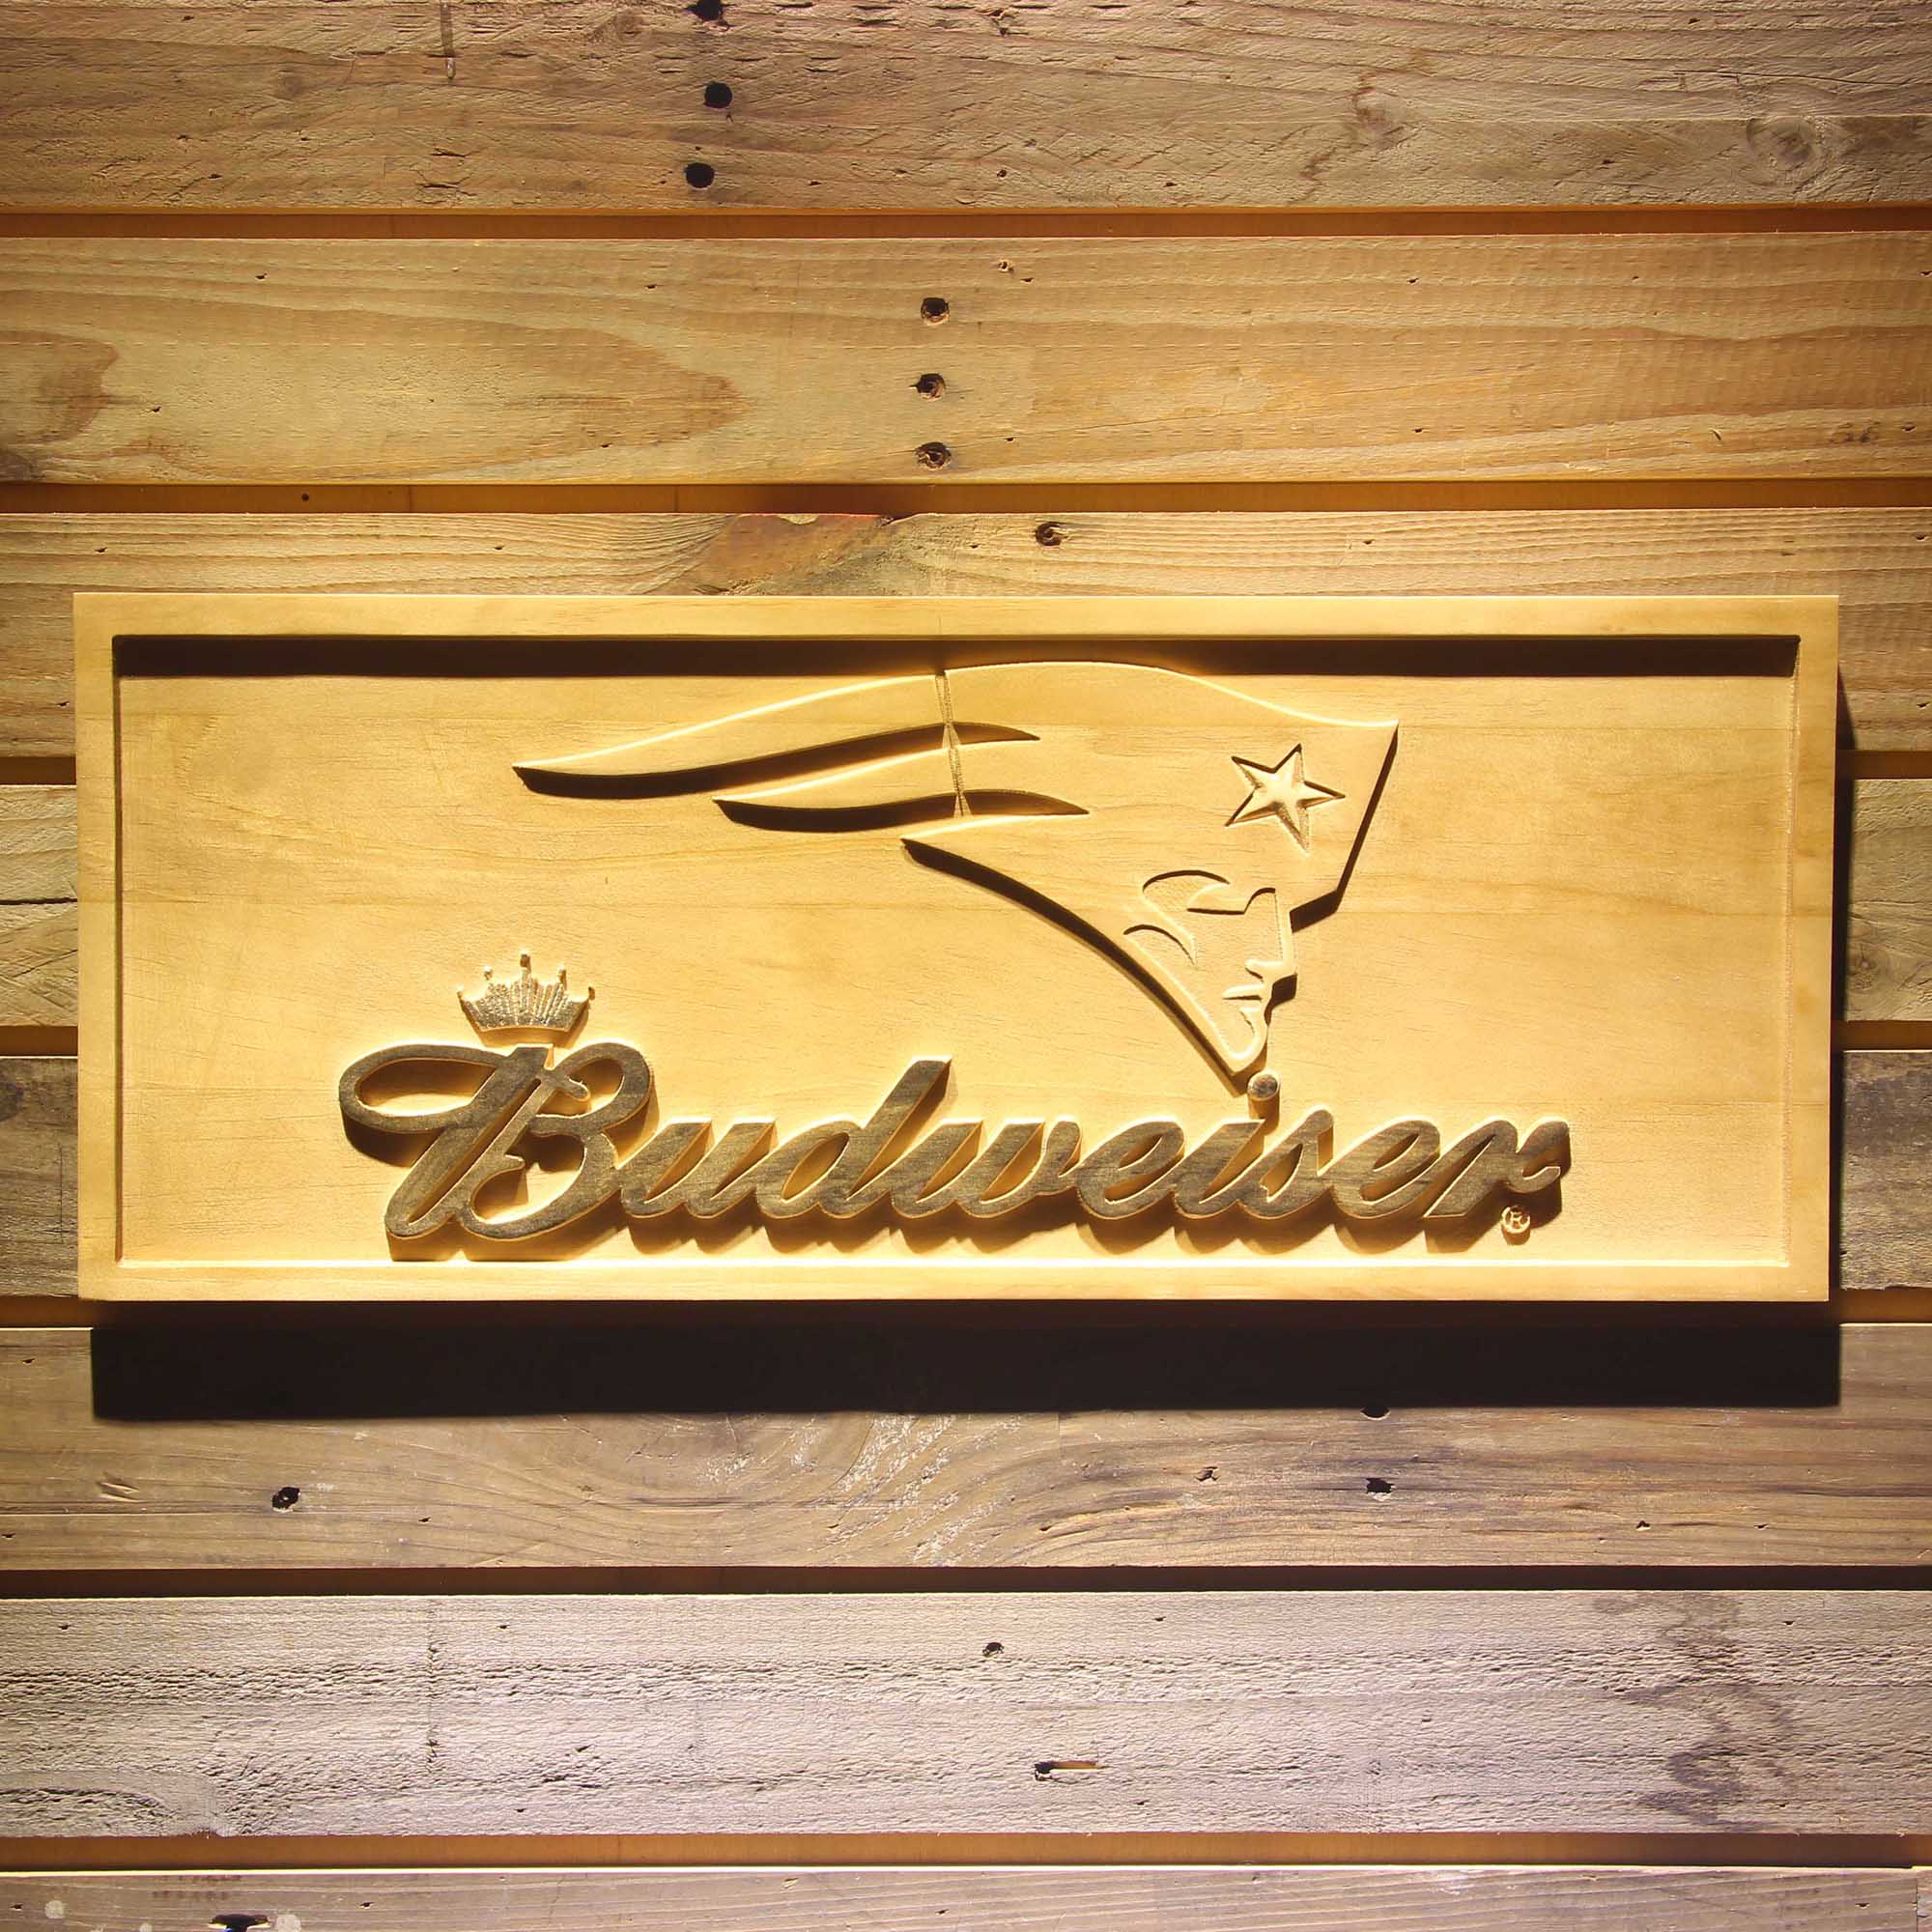 New England Patriots Budweiser 3D Wooden Engrave Sign